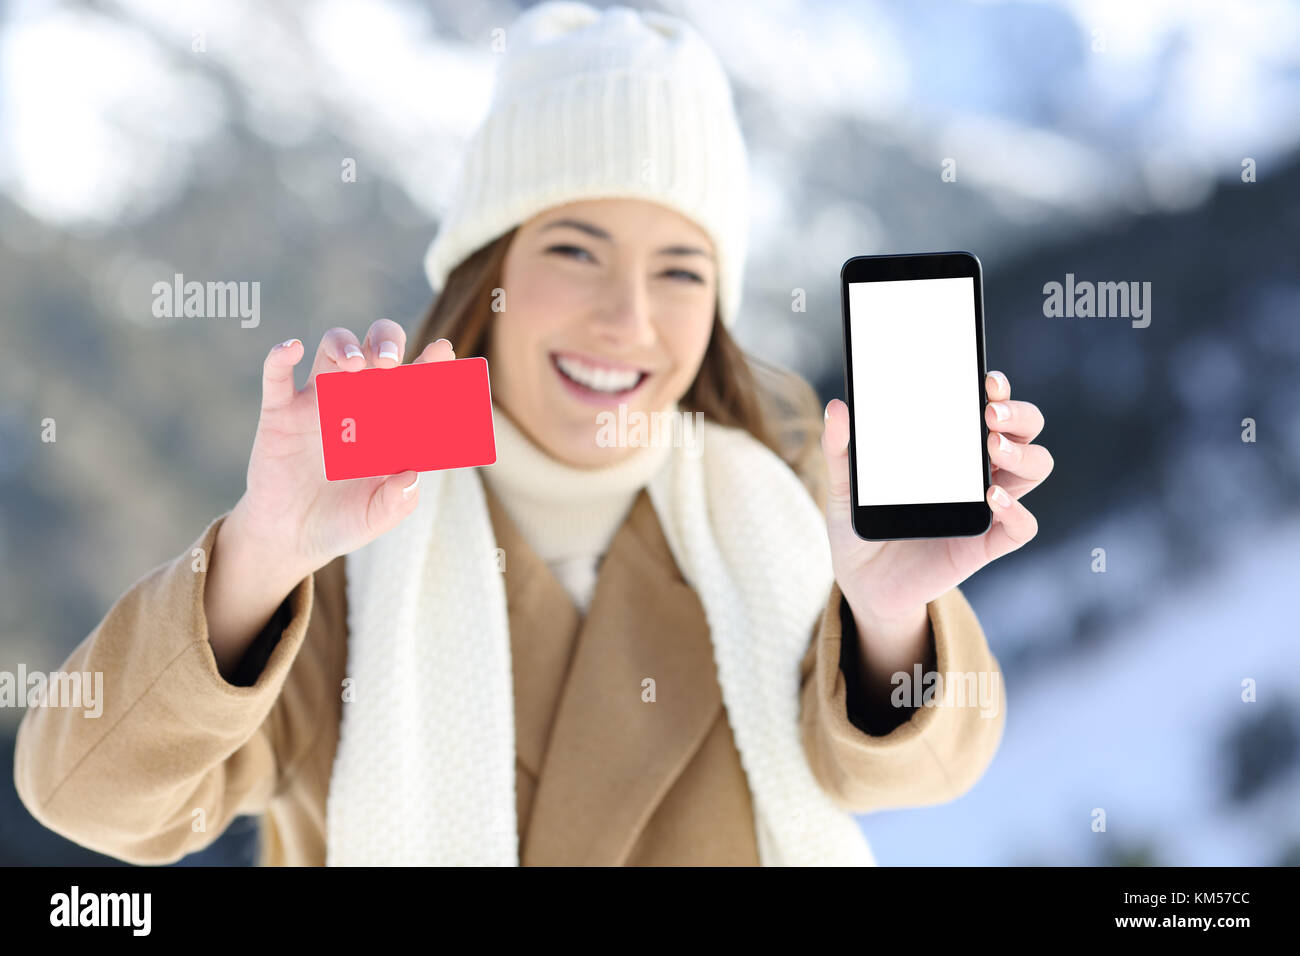 Front view portrait of a woman showing a card and phone screen in a snowy mountain in winter Stock Photo